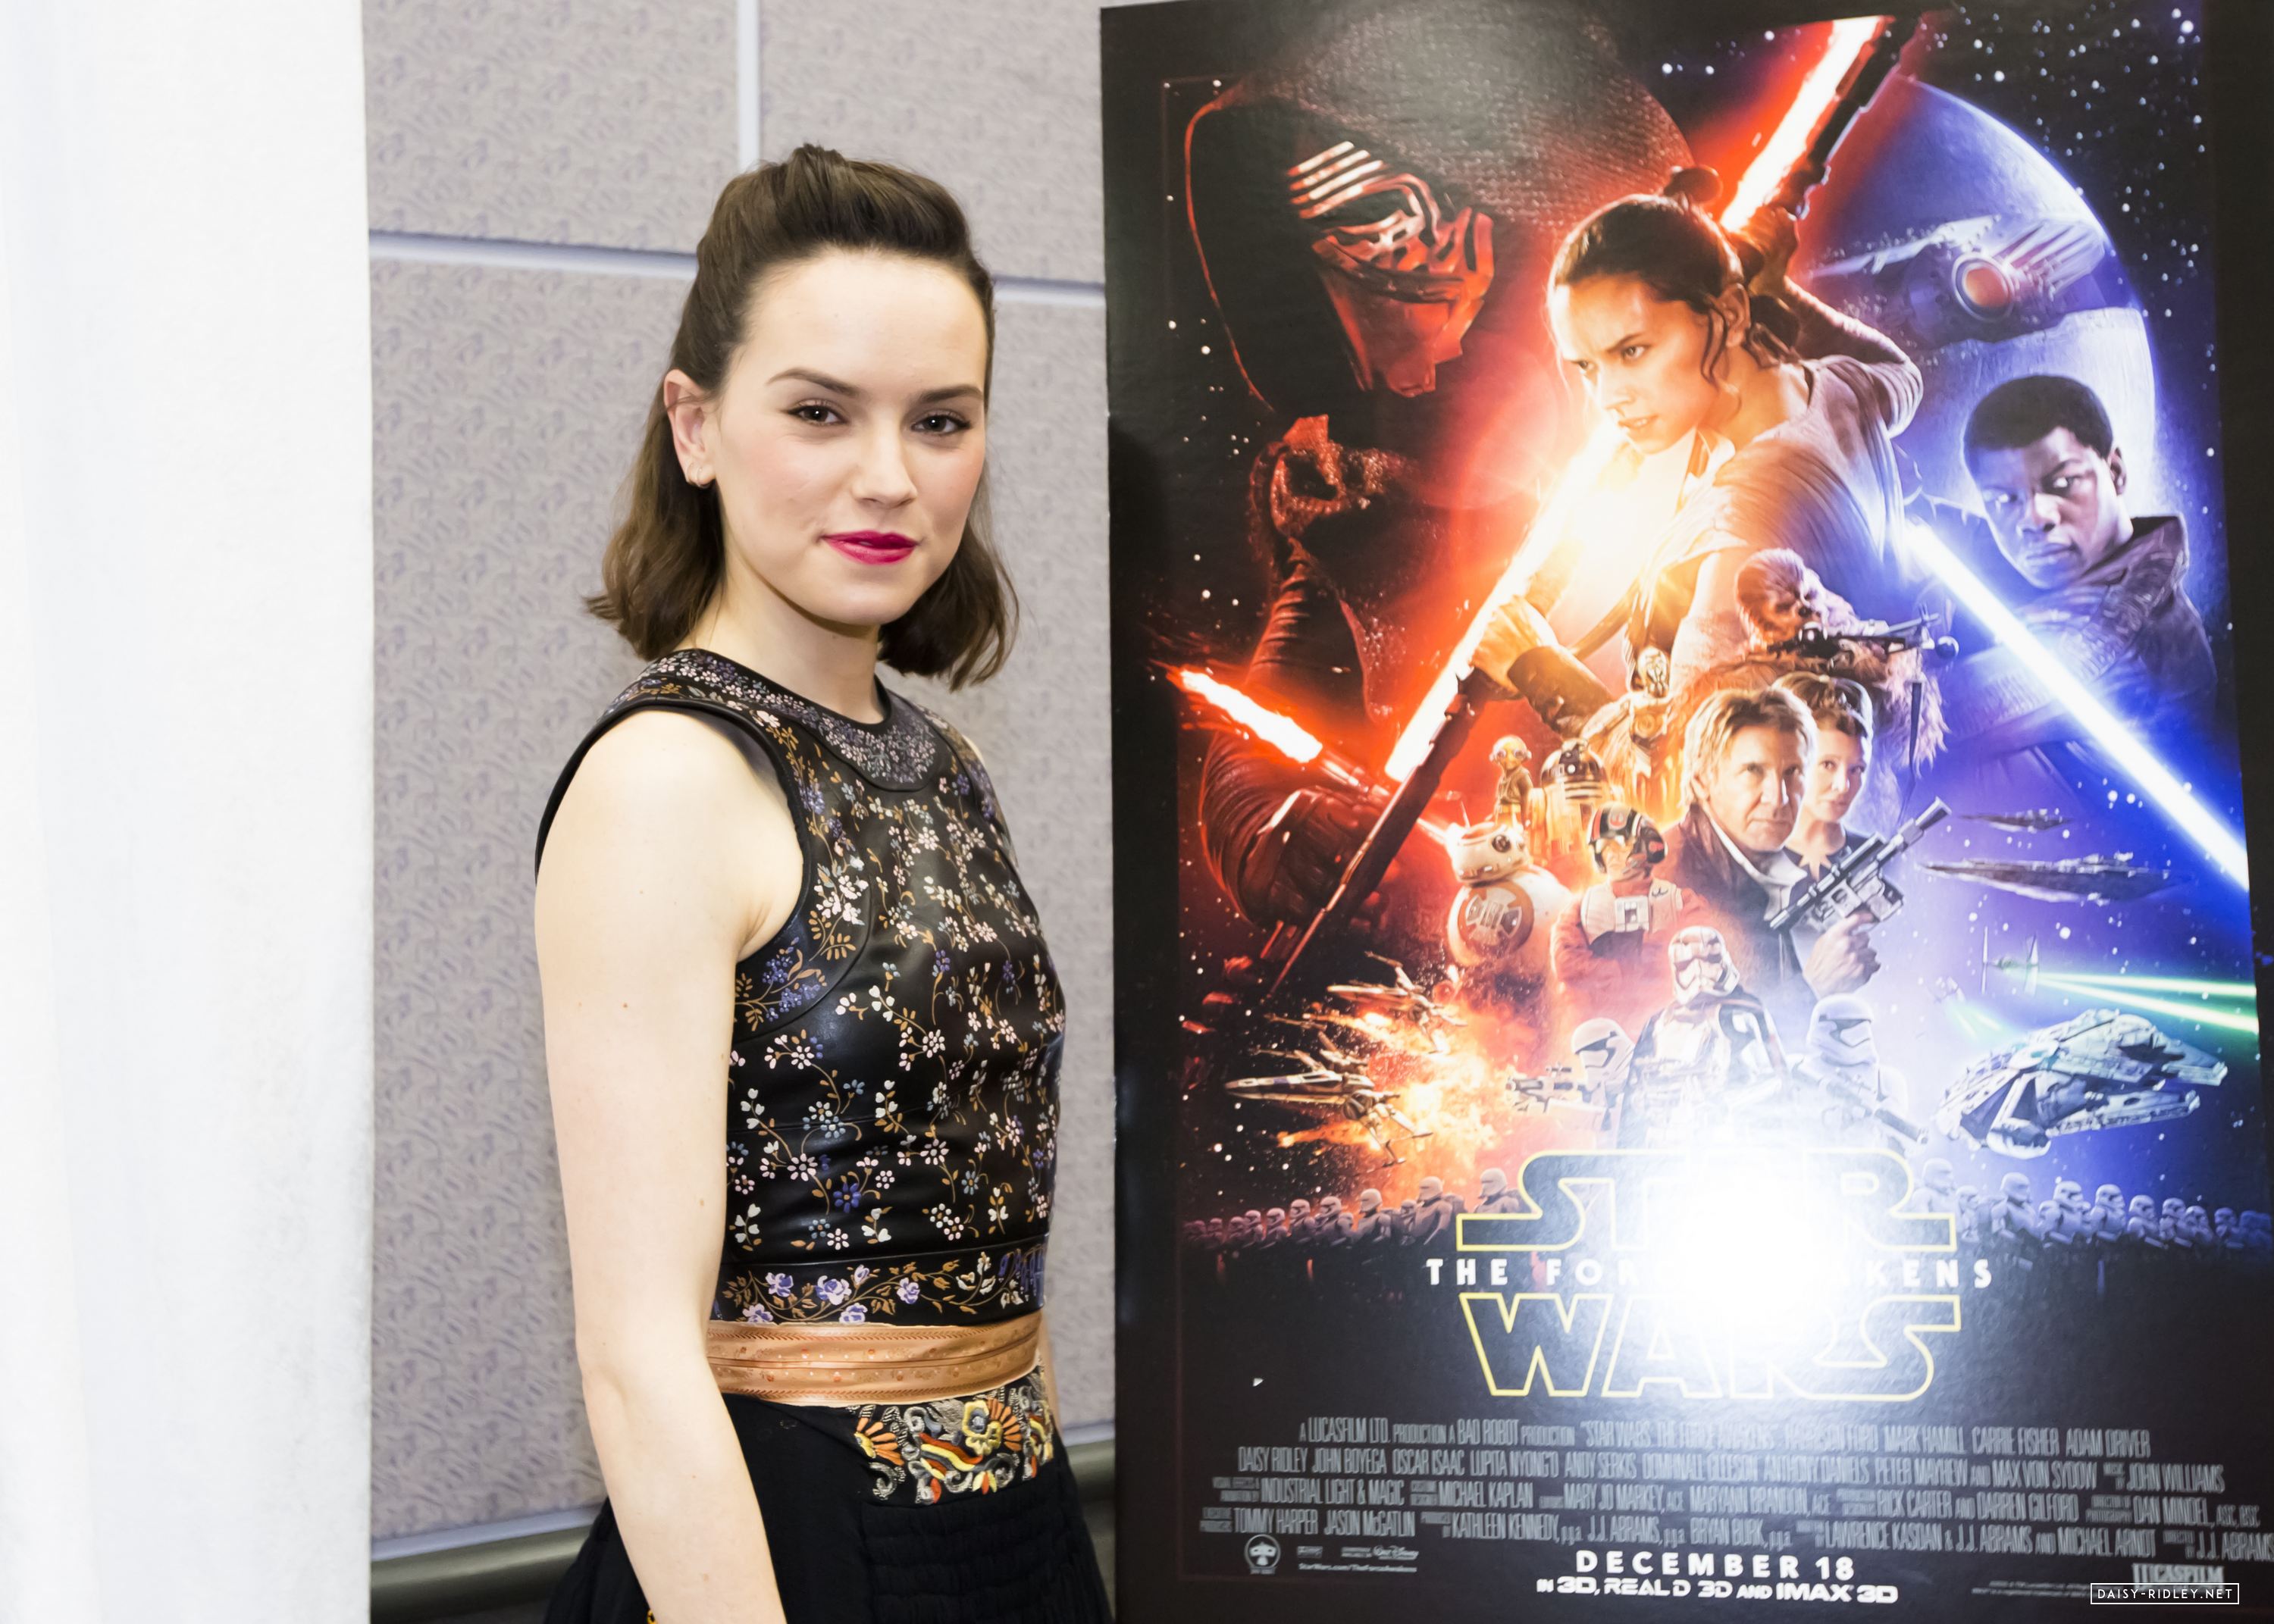 First Gallery of Daisy Ridley. 